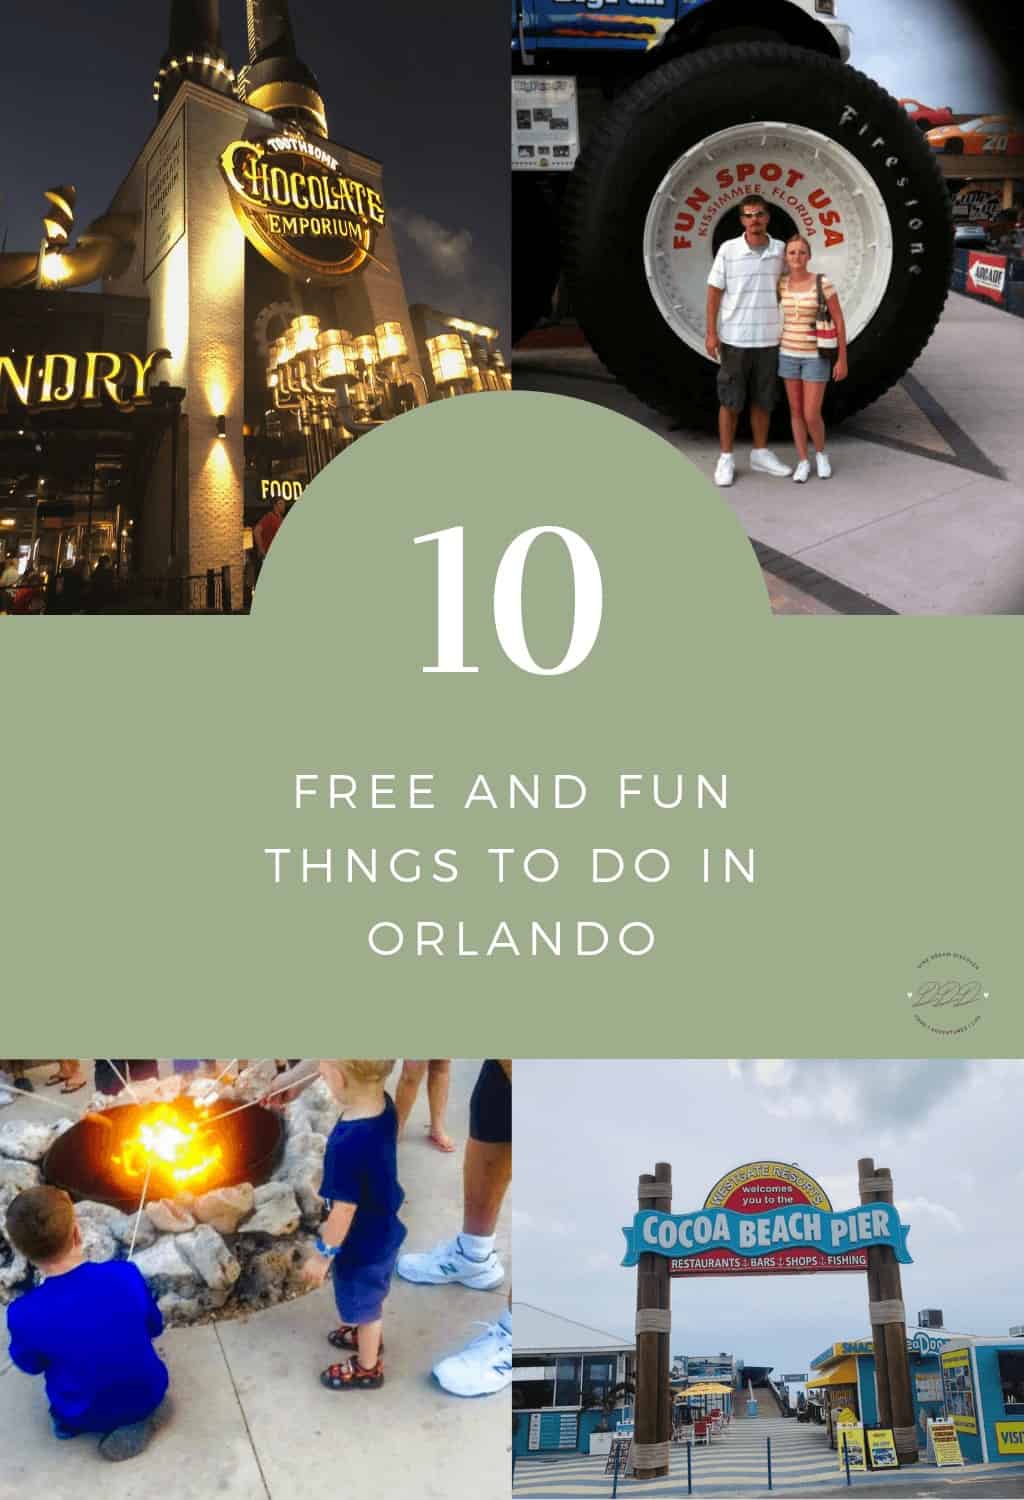 If you’re looking for fun ways to entertain your family this summer, check out these 10 fun and free things to do in Orlando.